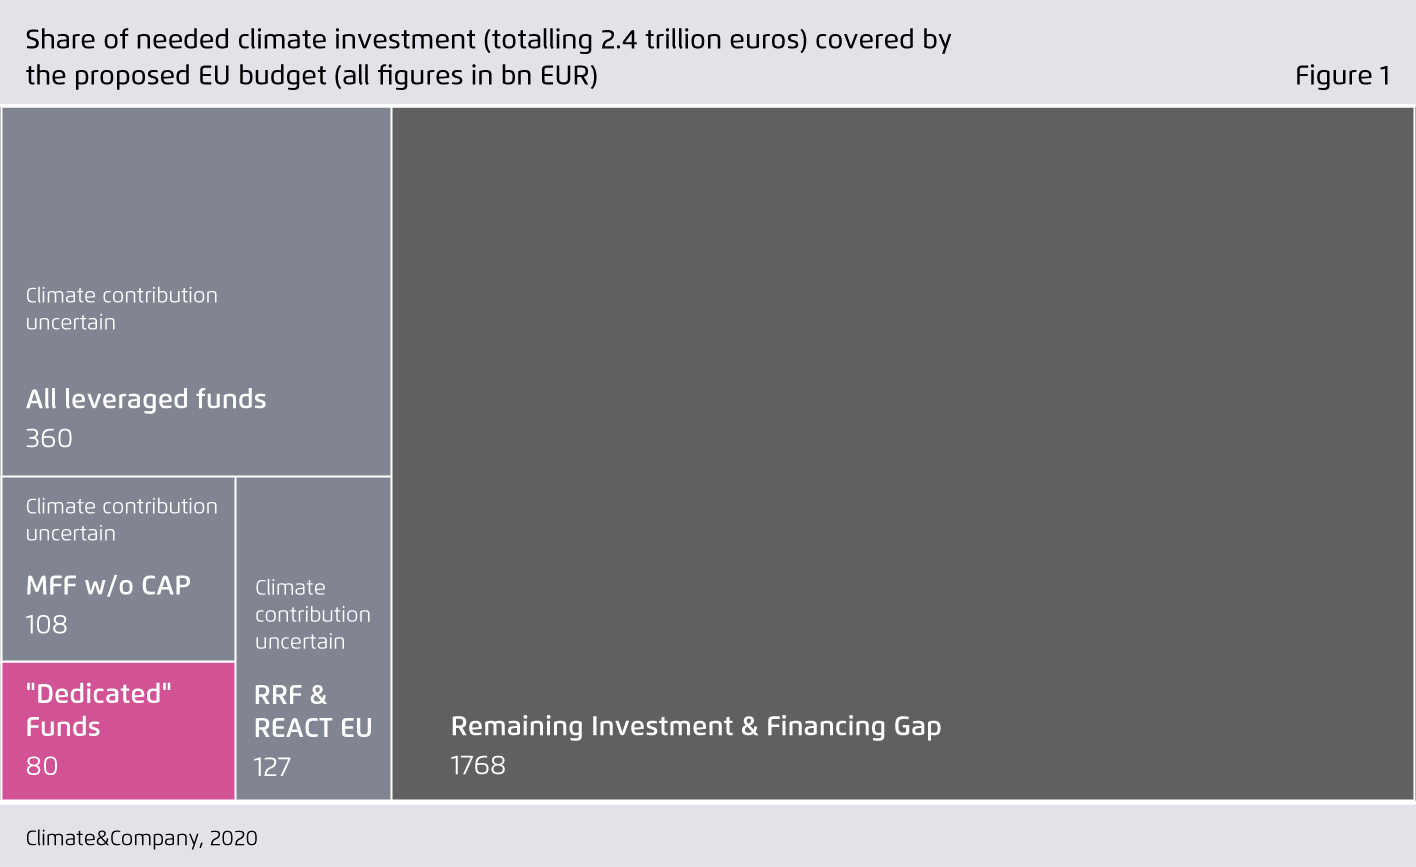 Preview for Share of needed climate investment (totalling 2.4 trillion euros) that could be covered by  the proposed EU budget (all figures in bn EUR)